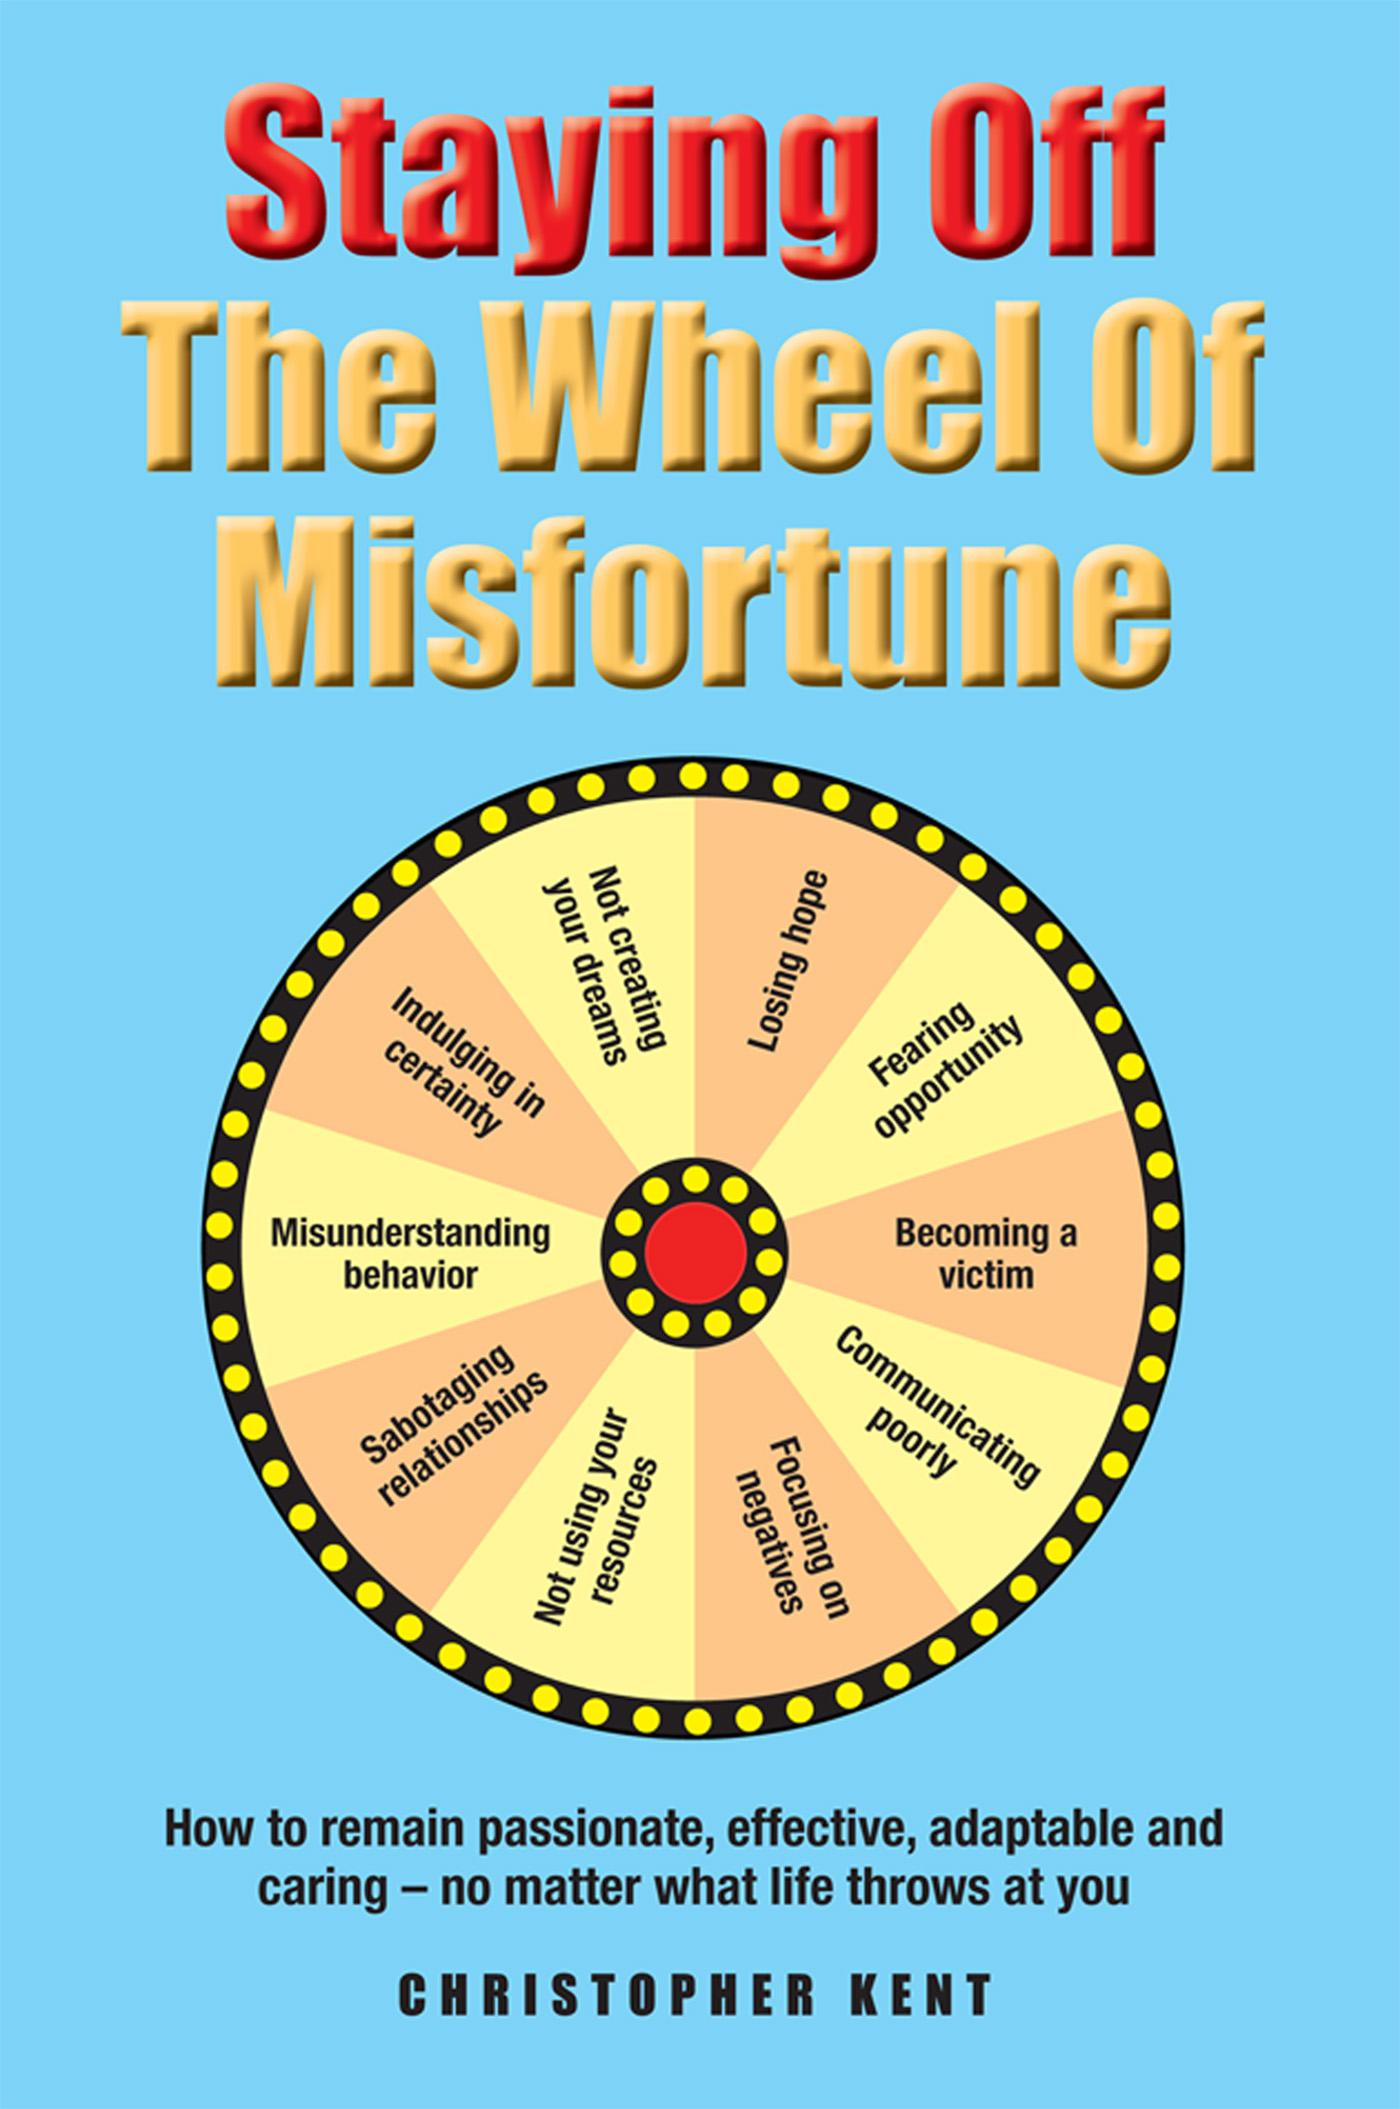 Staying Off the Wheel of Misfortune